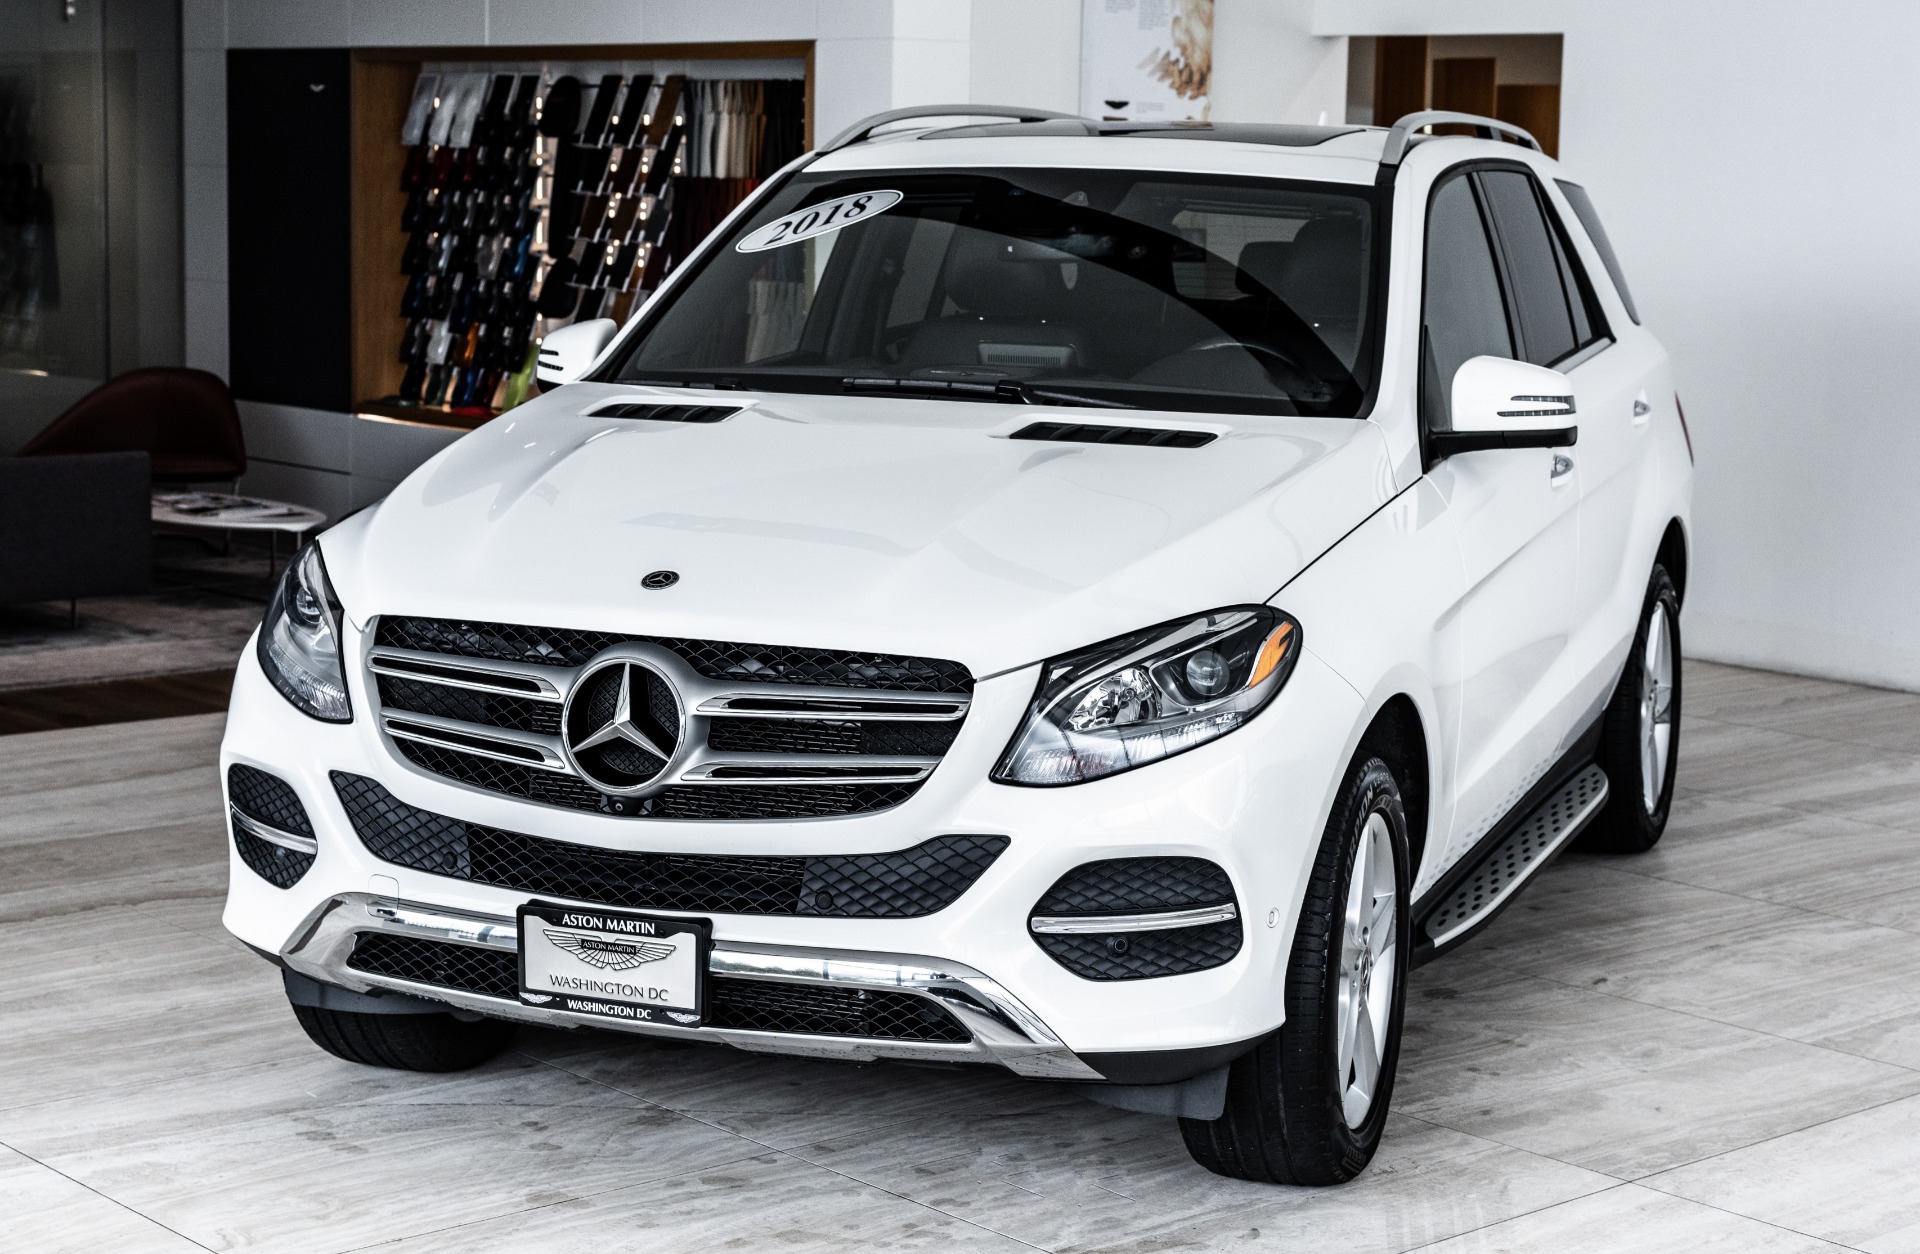 2018 Mercedes-Benz GLE GLE 350 4MATIC Stock # P069496 for sale near